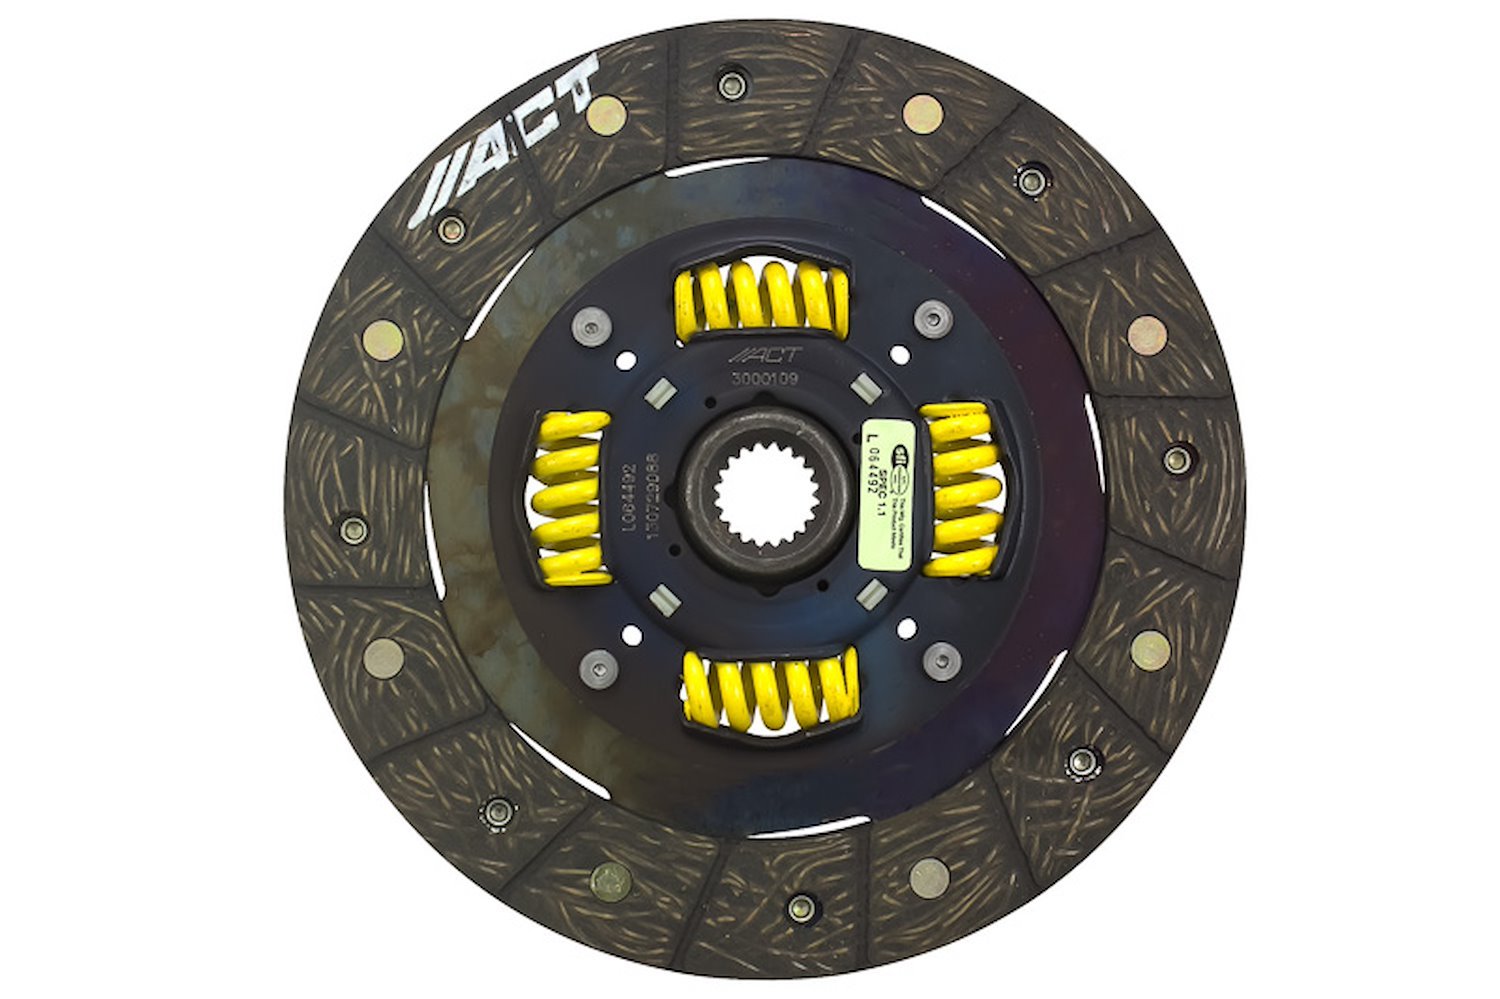 Performance Street Sprung Clutch Disc Transmission Clutch Friction Plate Fits Select Acura/Honda